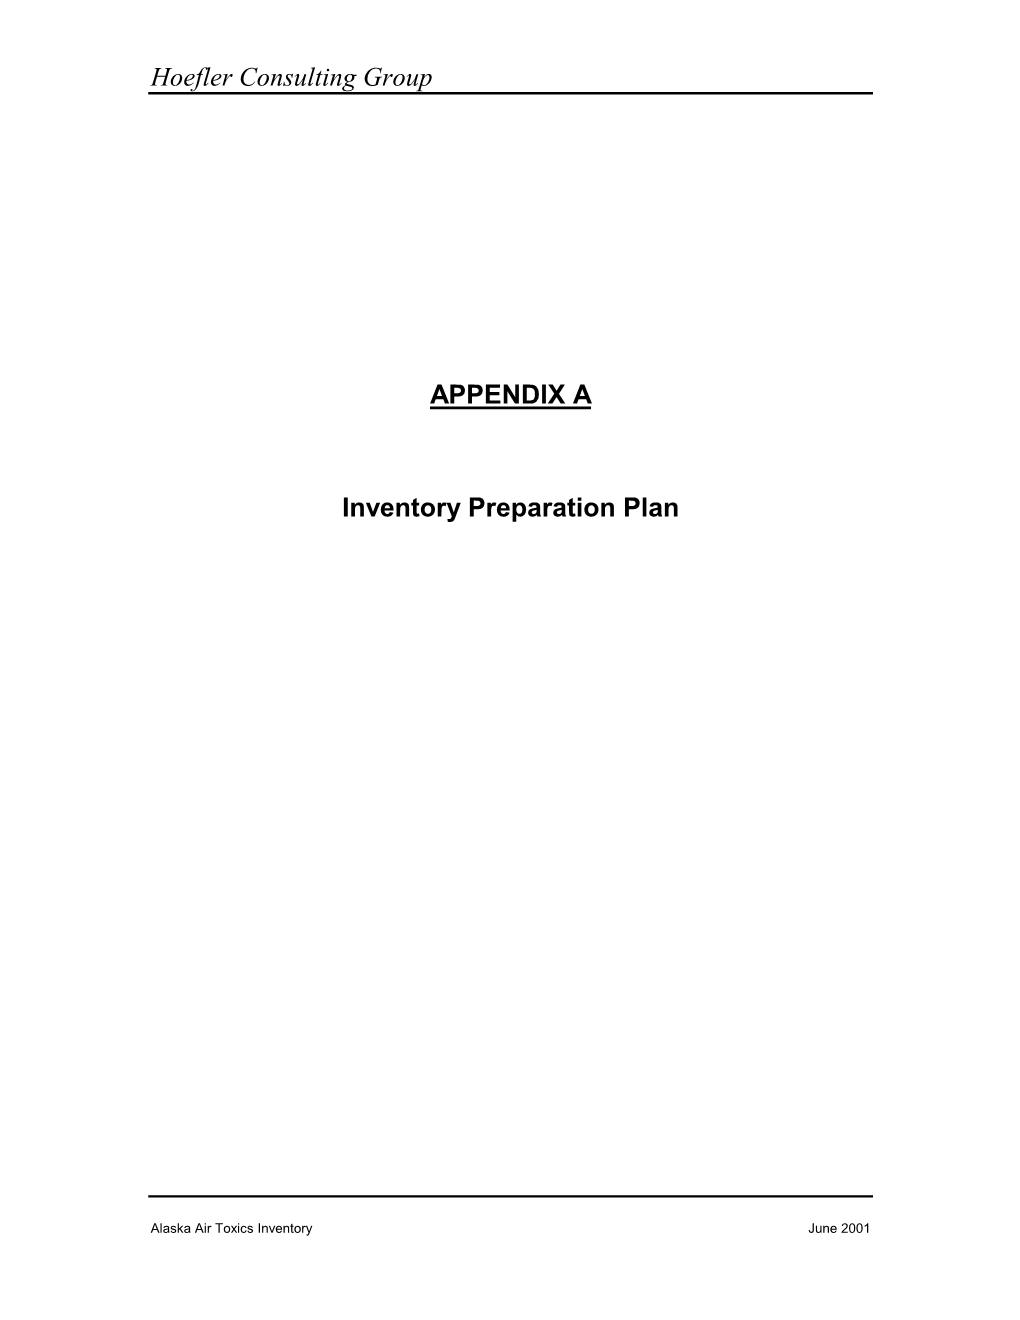 Hoefler Consulting Group APPENDIX a Inventory Preparation Plan